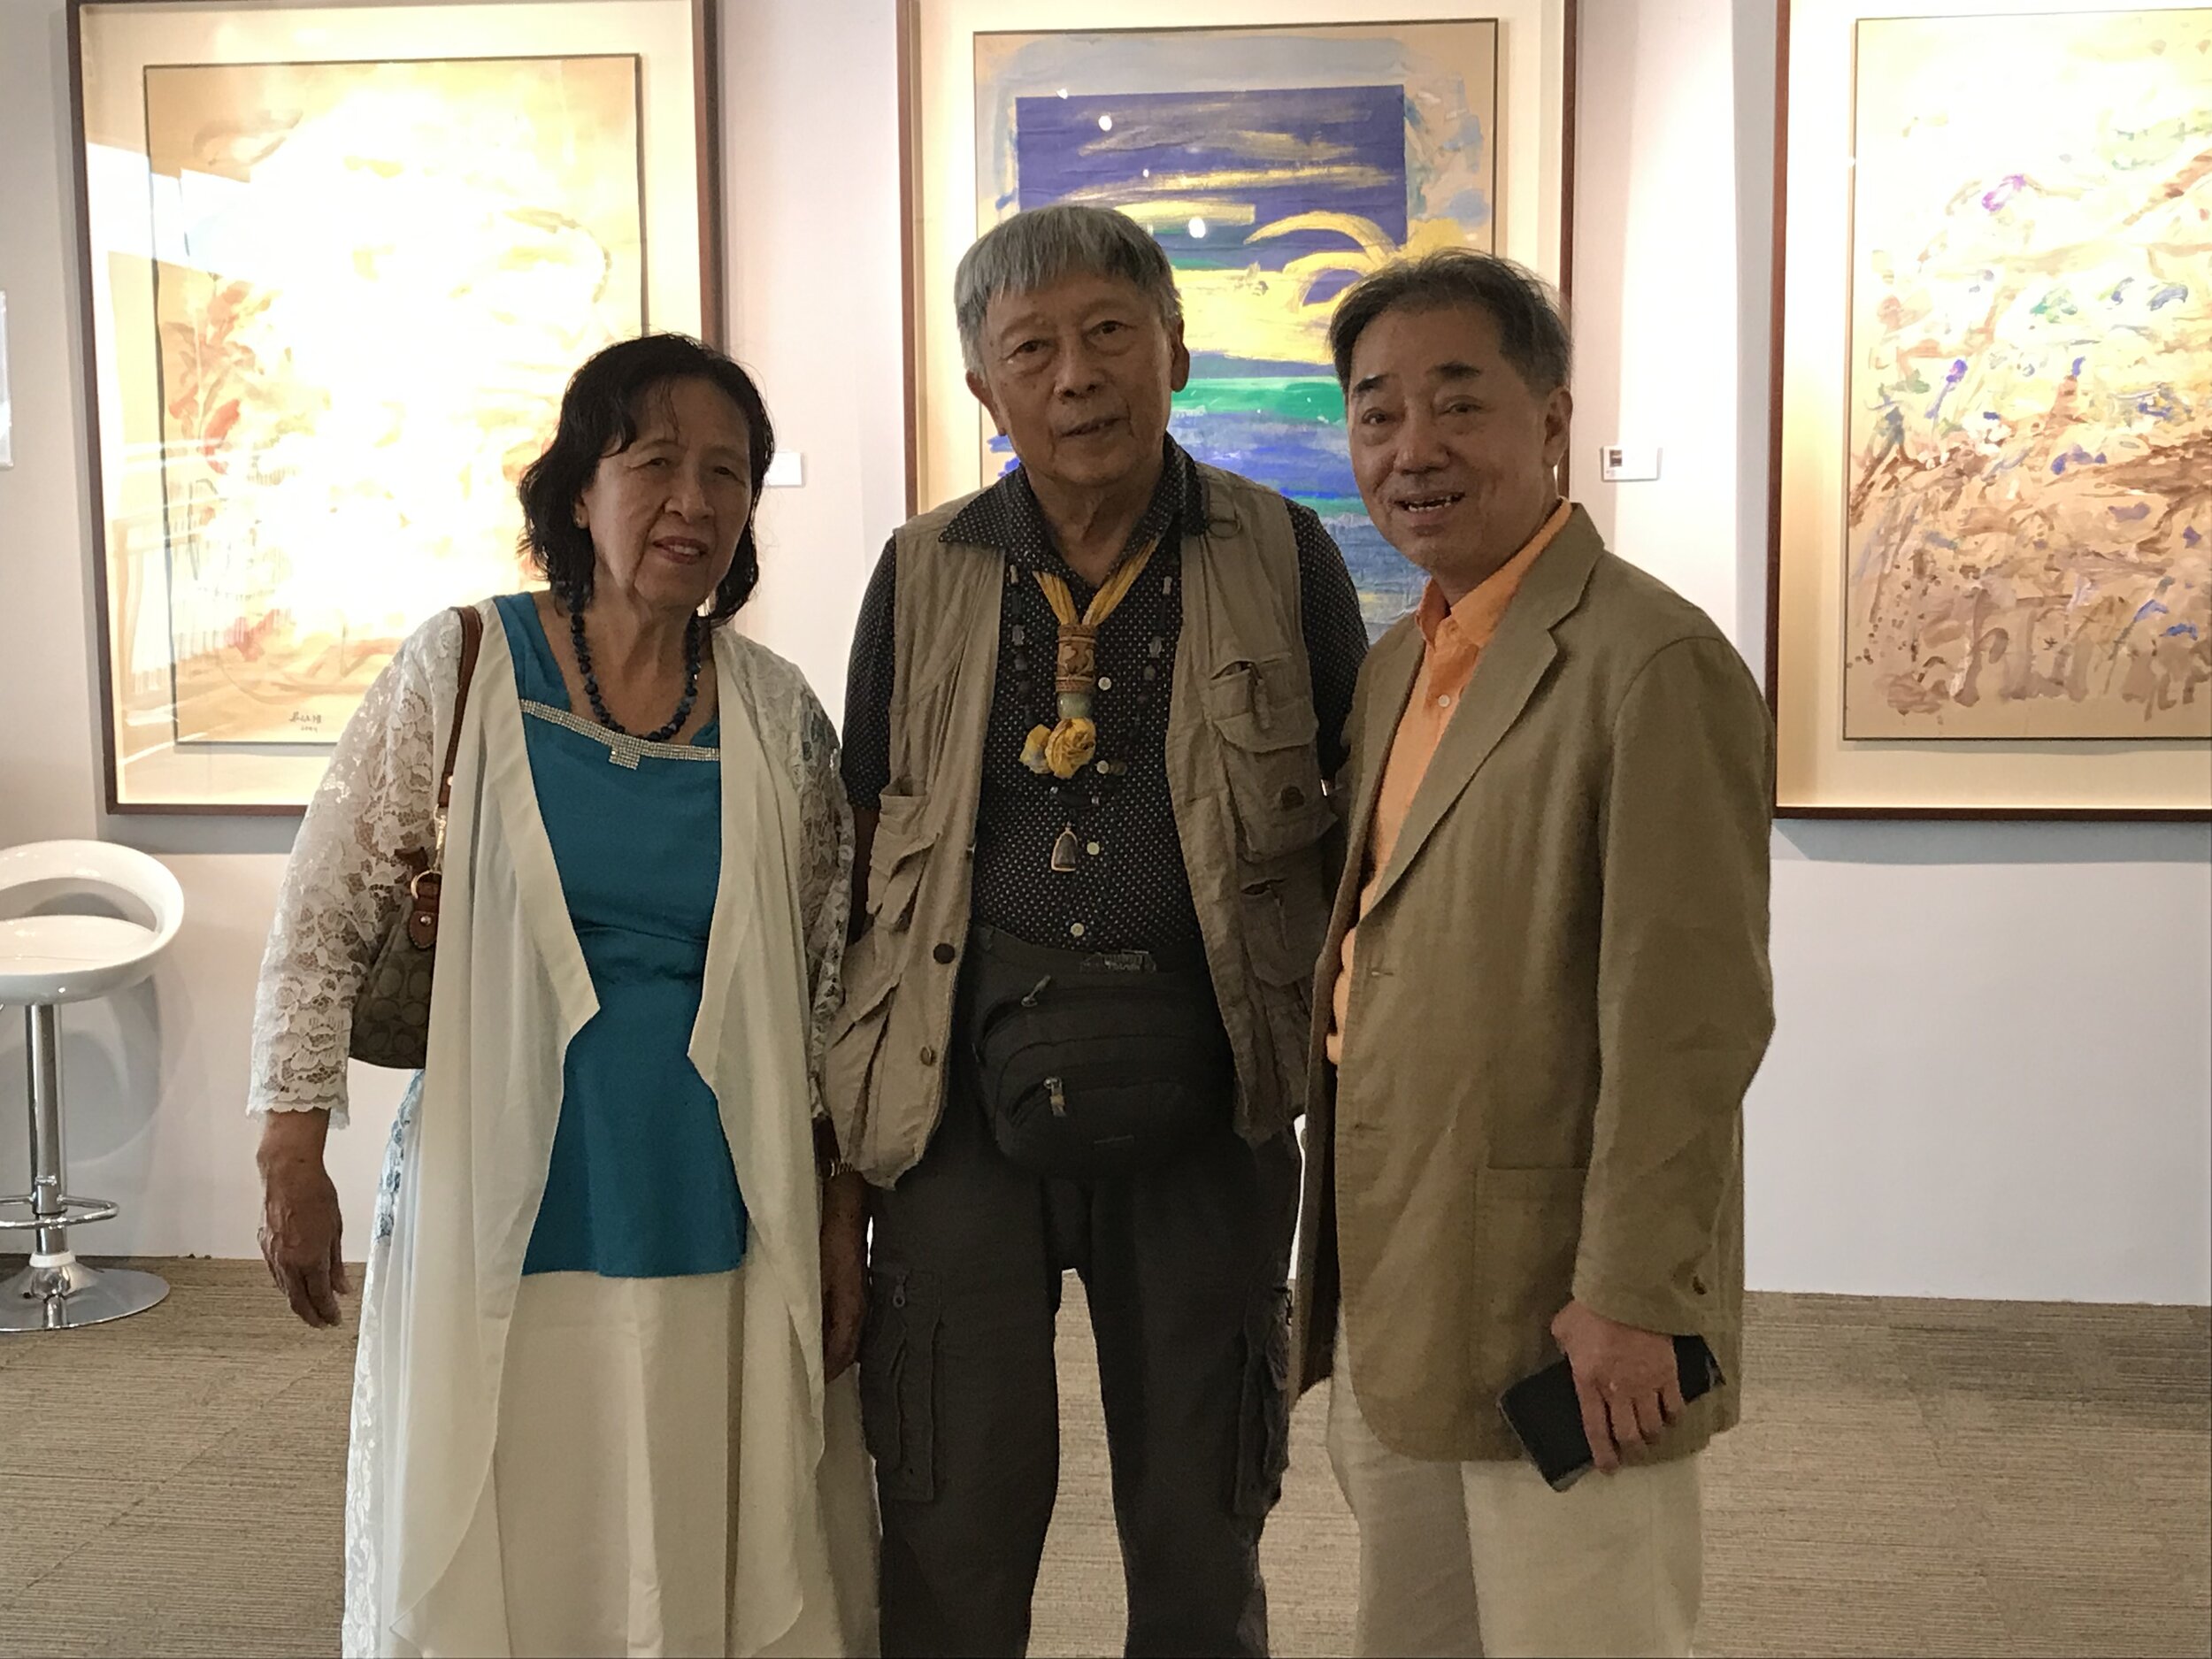  Mr Goh Beng Kwan (centre) and Mr Terence Teo (Right) during Mr Goh’s solo exhibition in 2019  